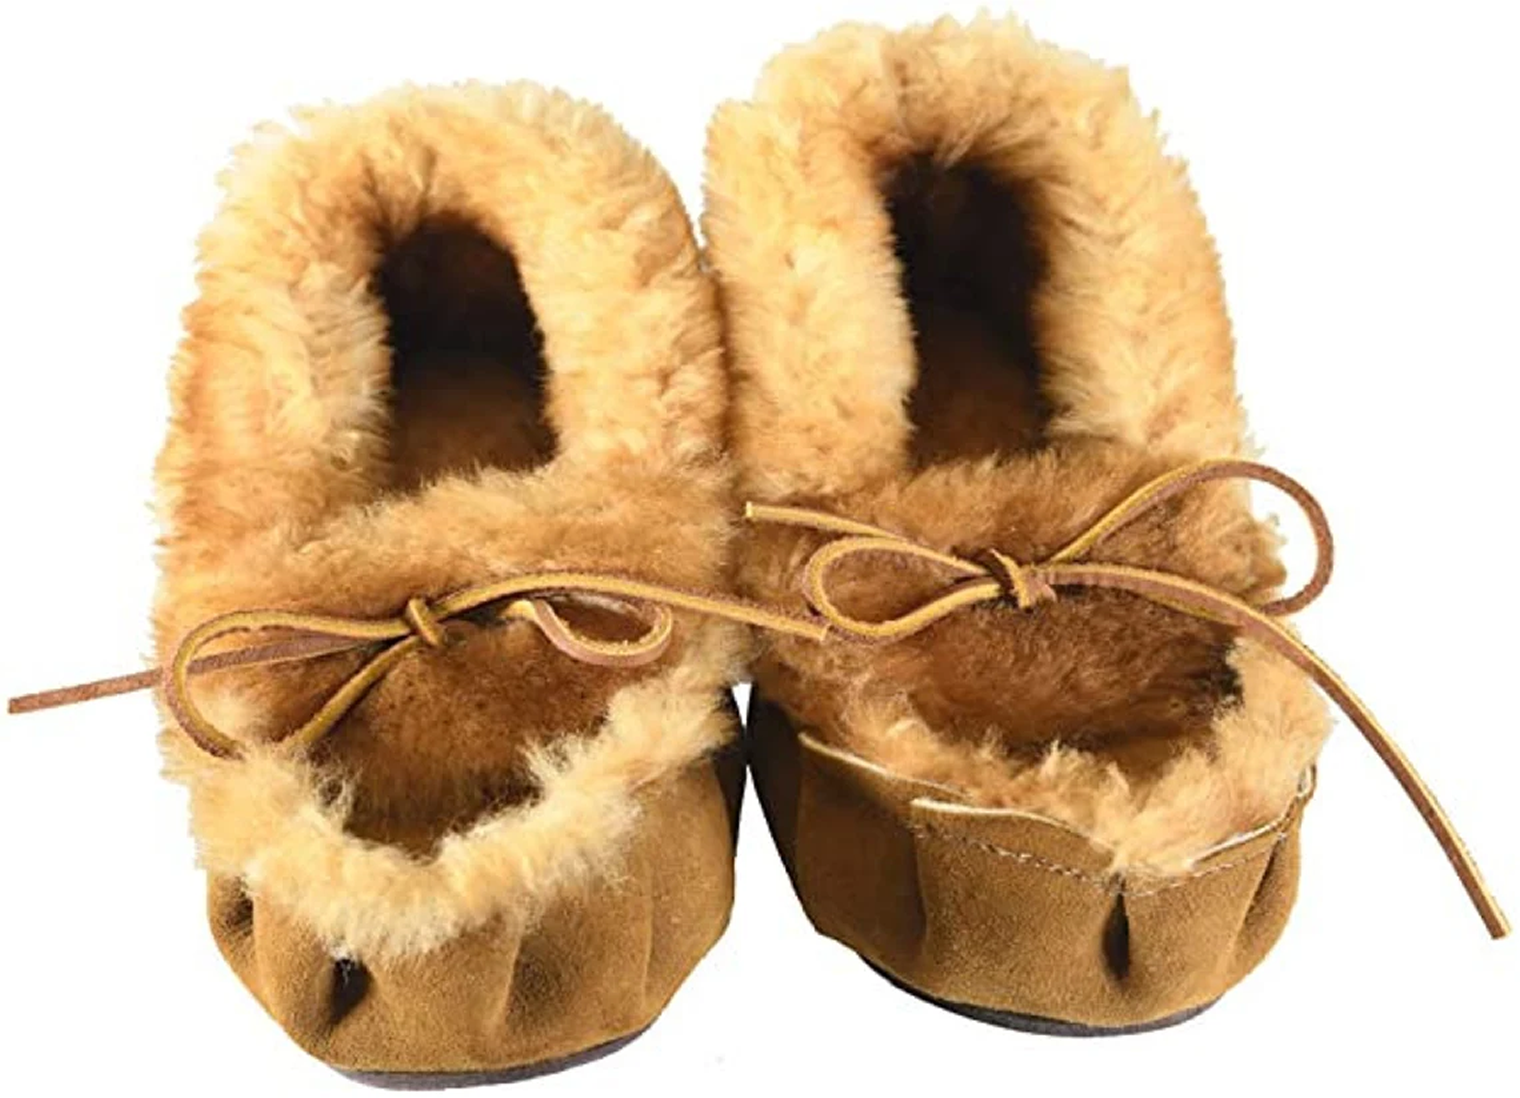 Moccasin Slippers - Teepee Creepers